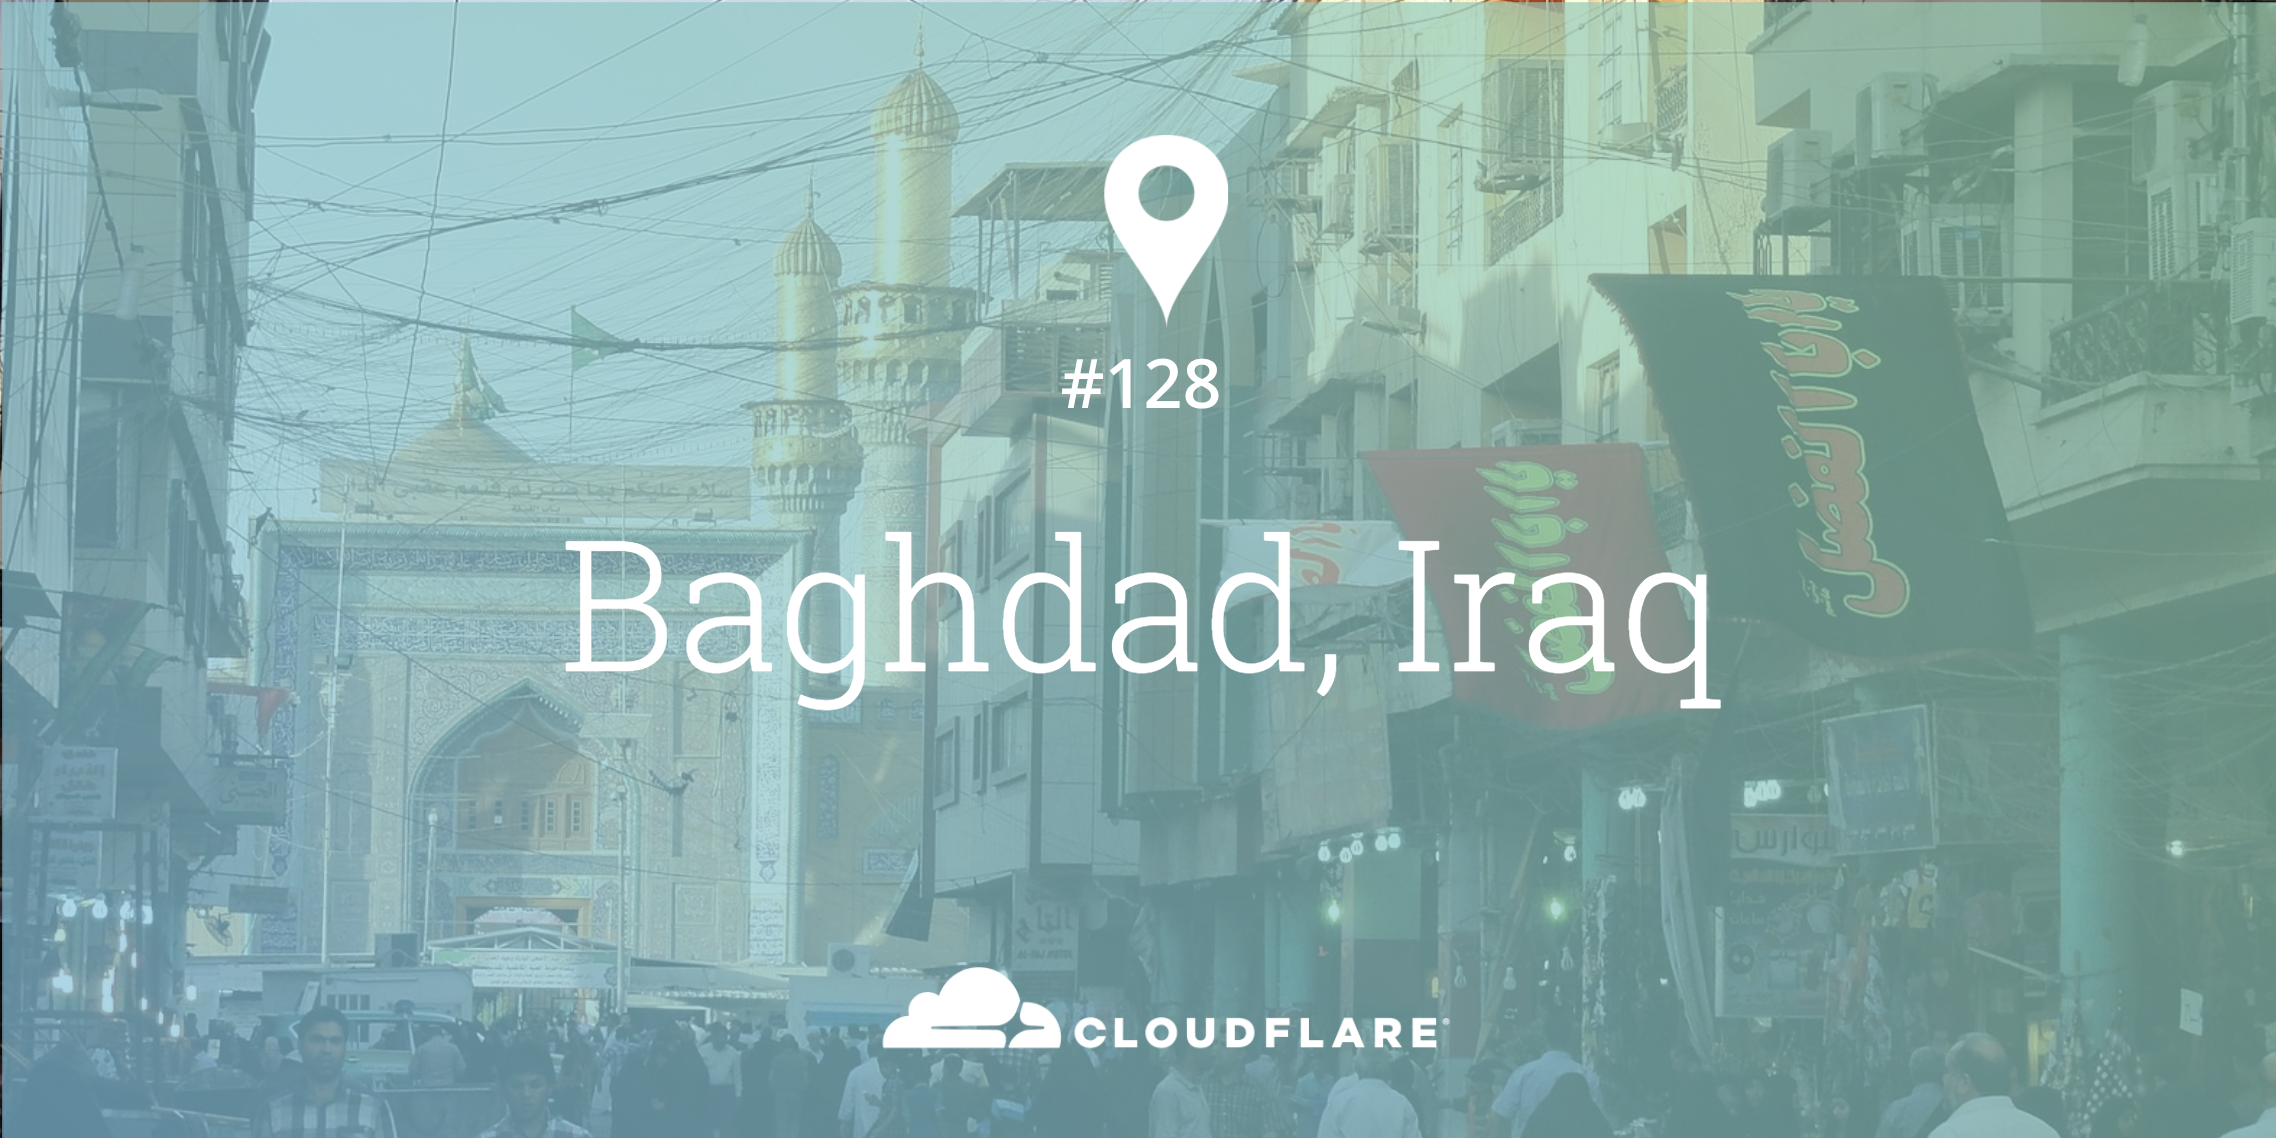 Baghdad, Iraq: Cloudflare's 128th Data Center